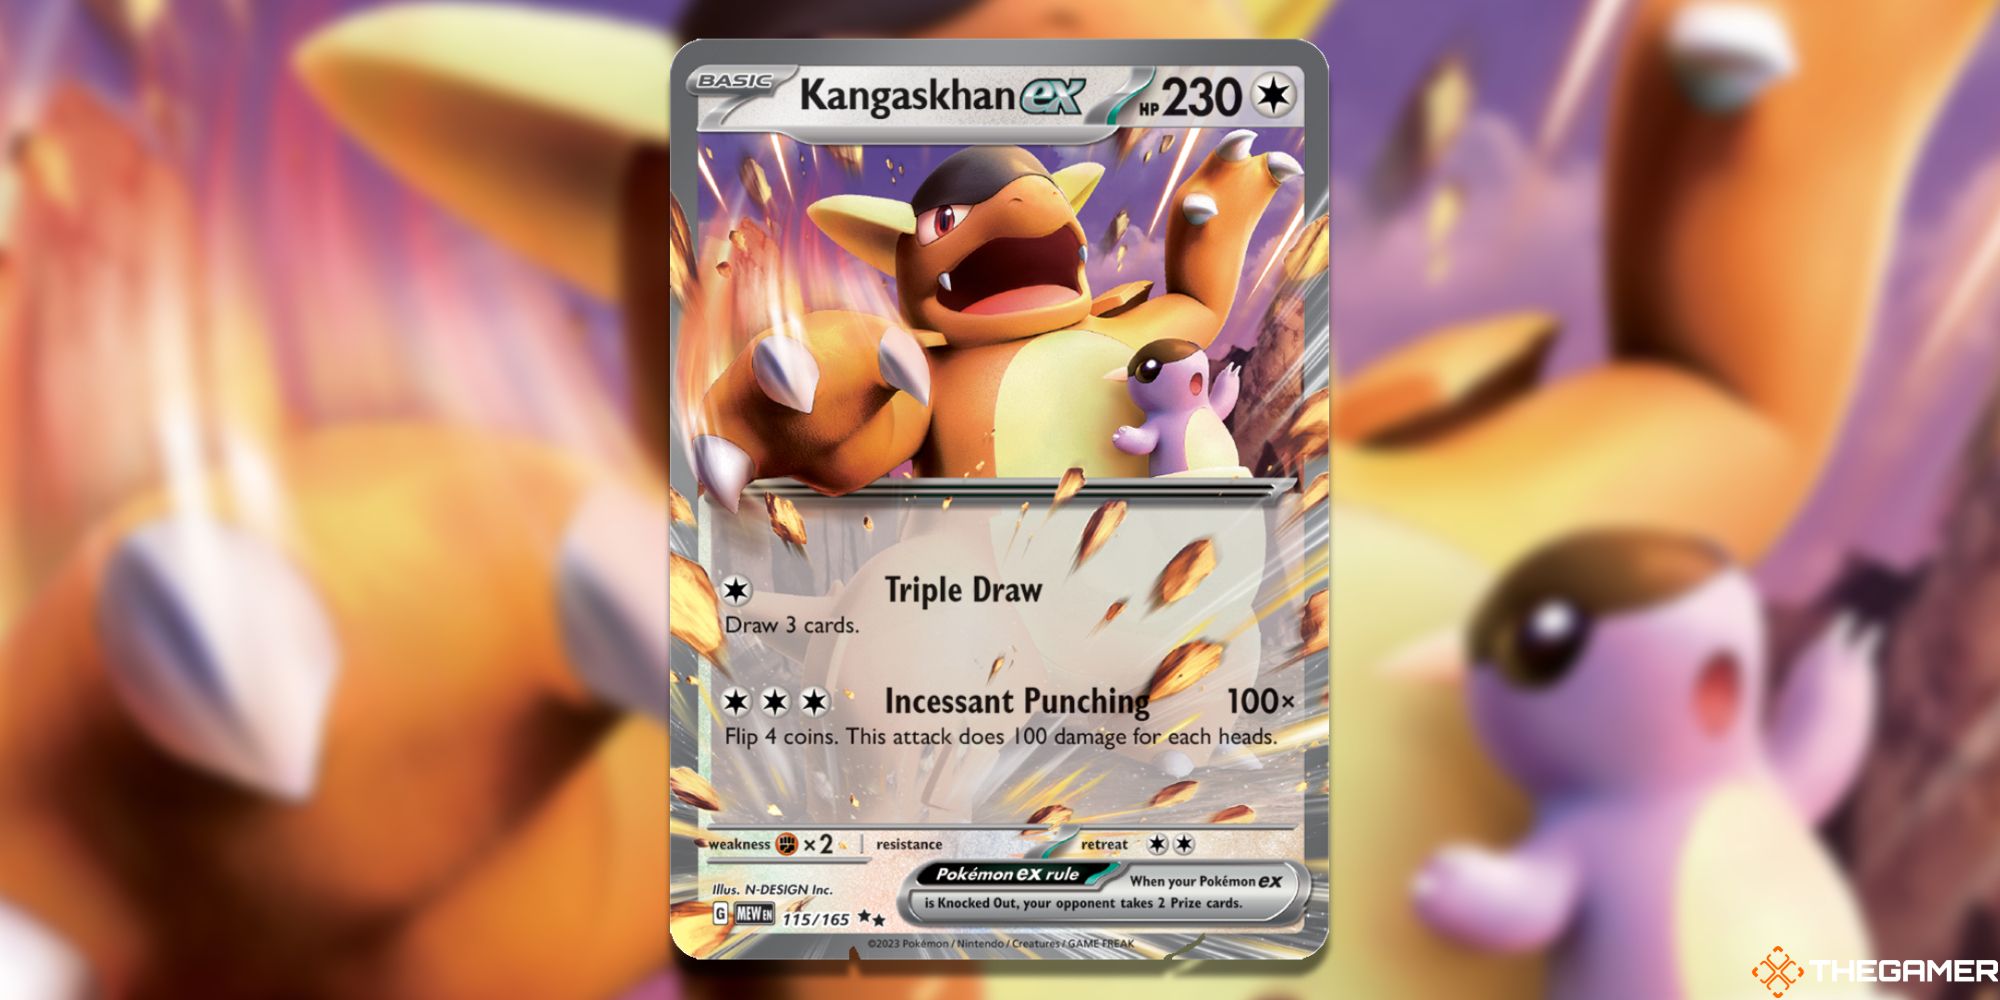 Image of the Kangaskhan ex card in Magic: The Gathering, with art by N-DESIGN inc